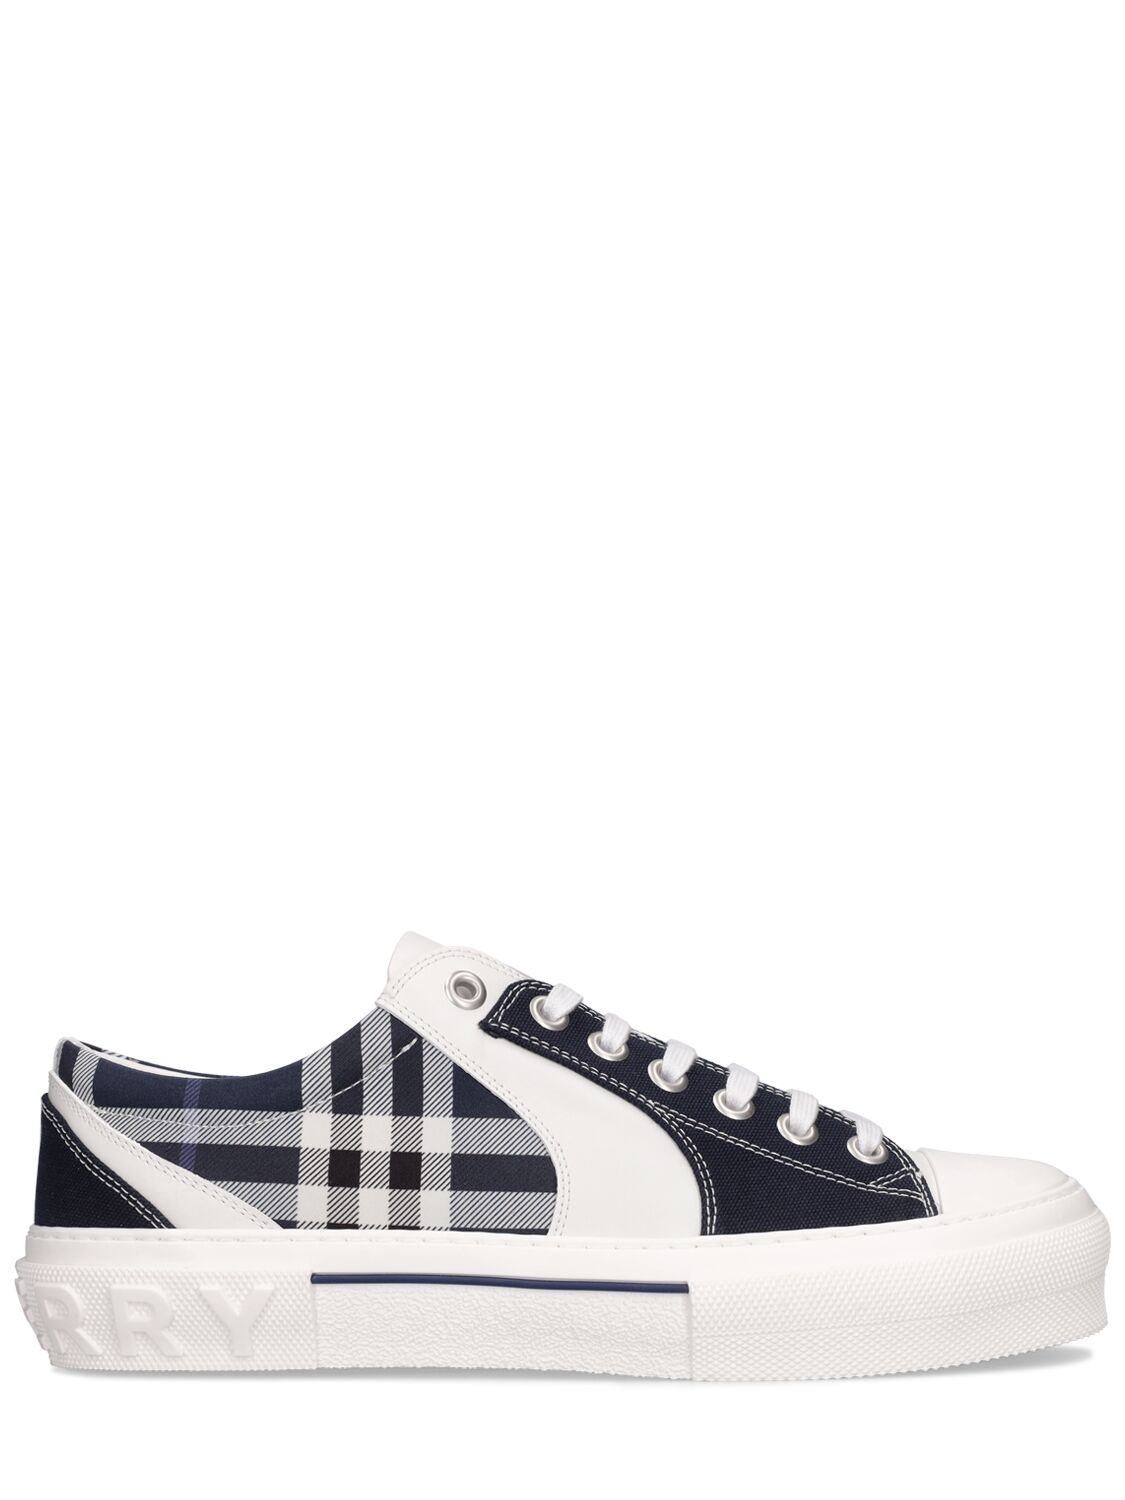 Burberry Vintage Check Low-top Trainers In Multi